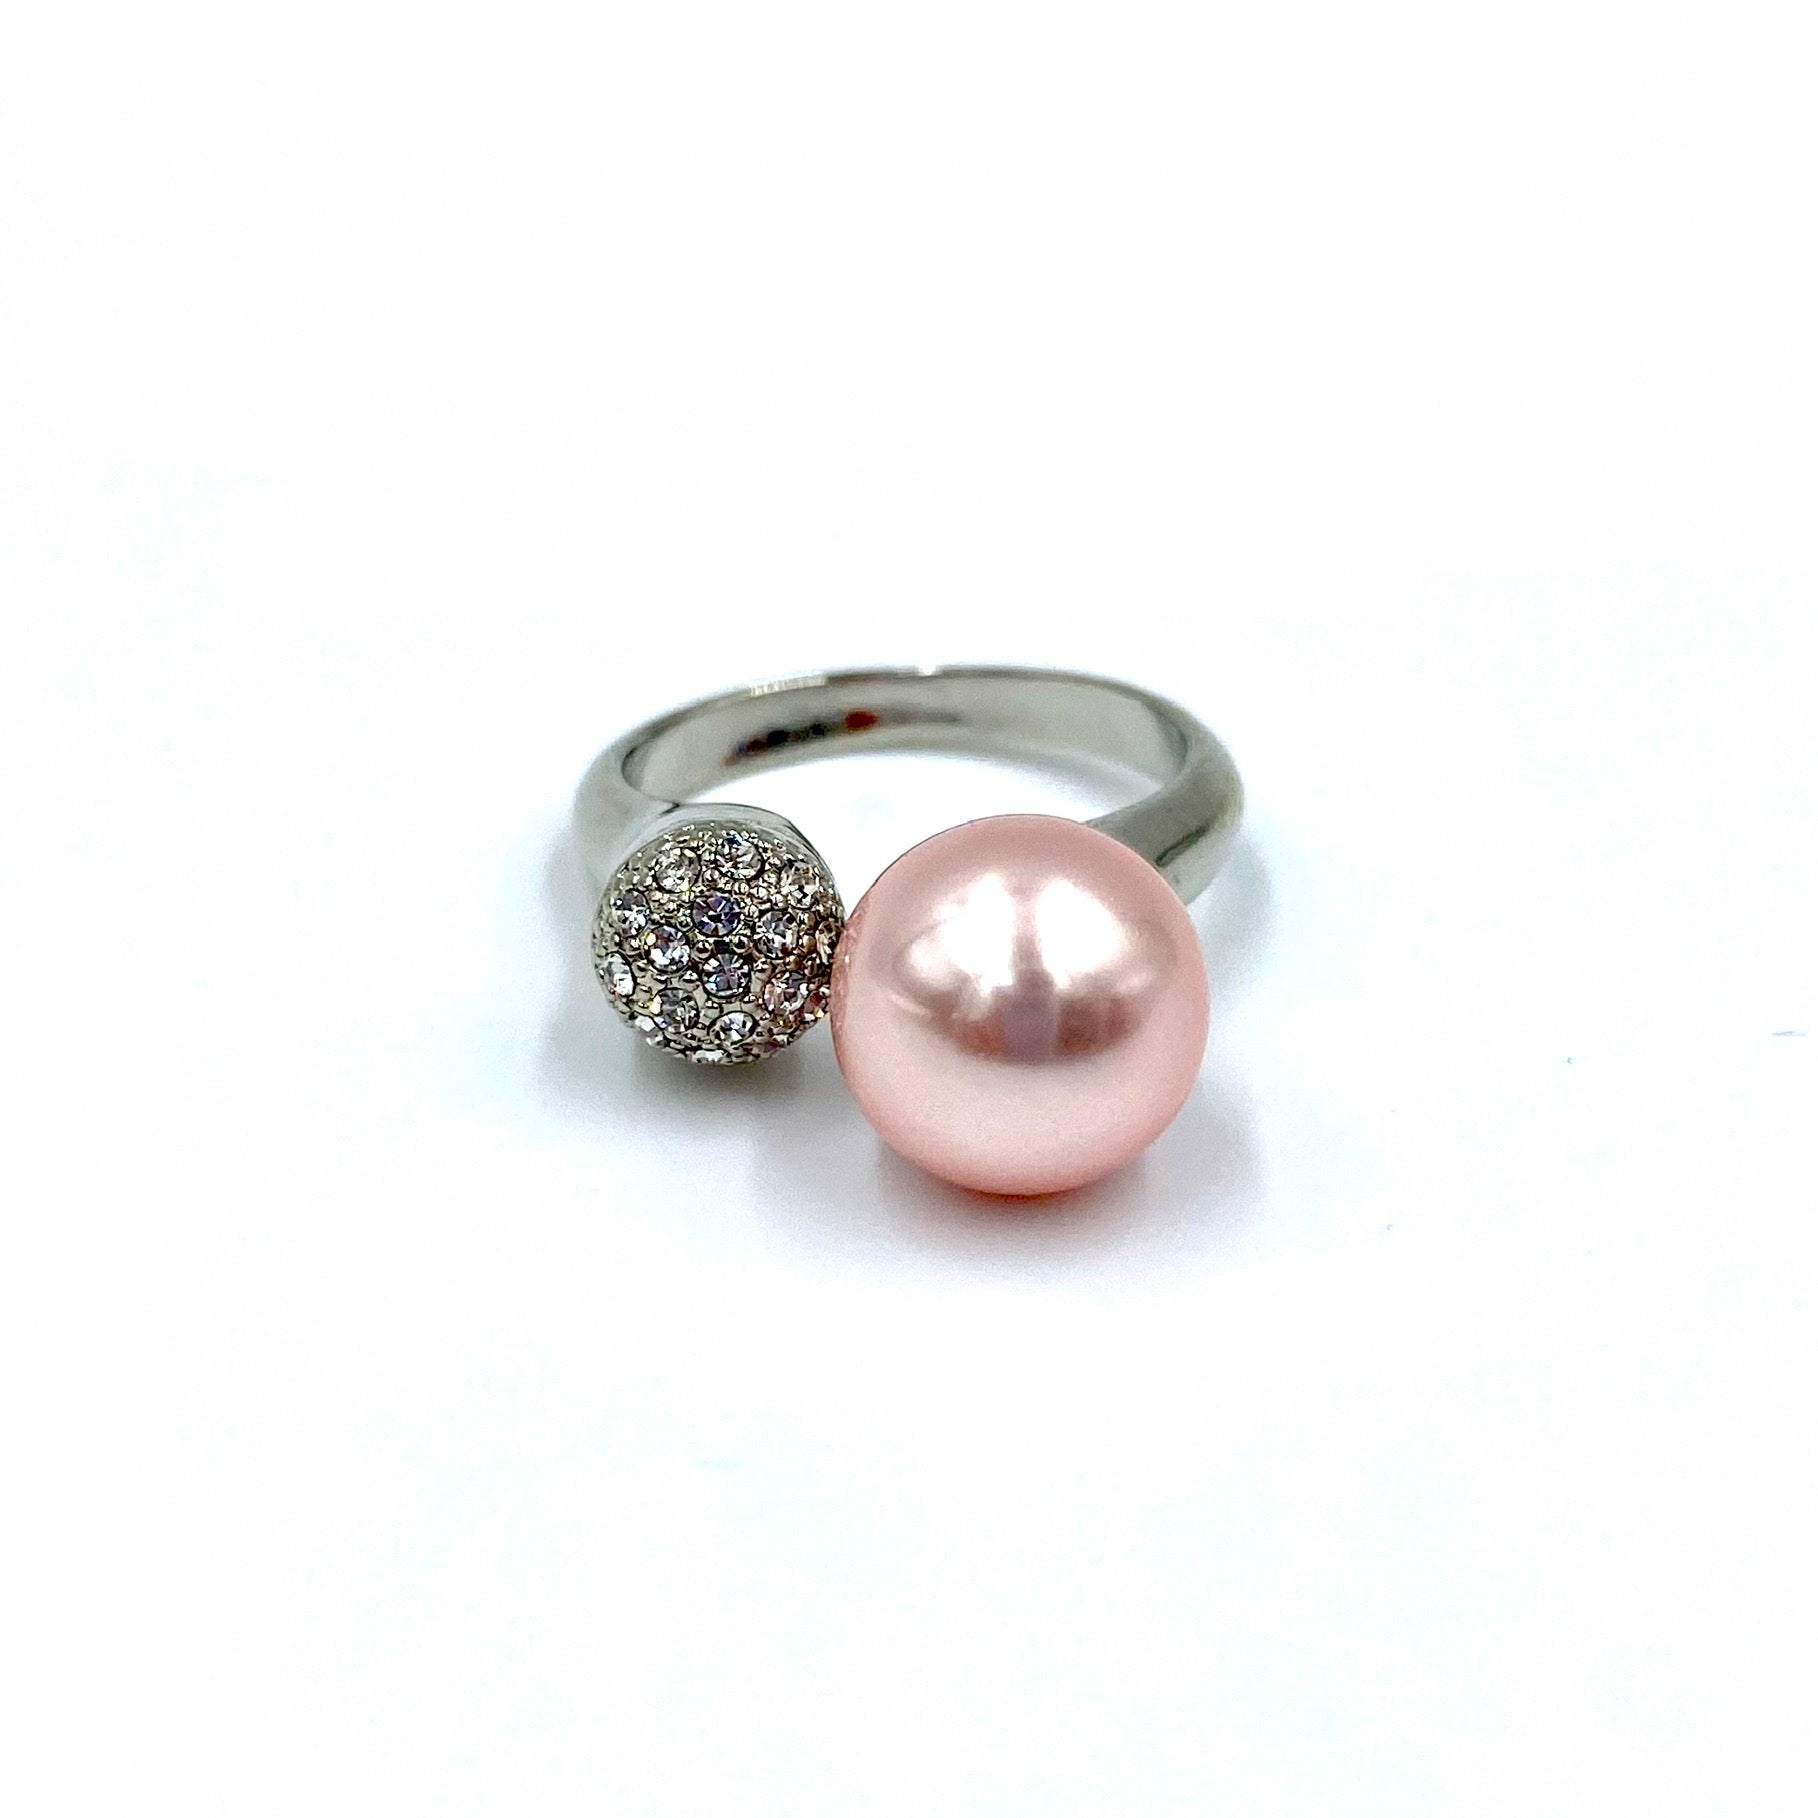 Elegant pink pearl and silver set